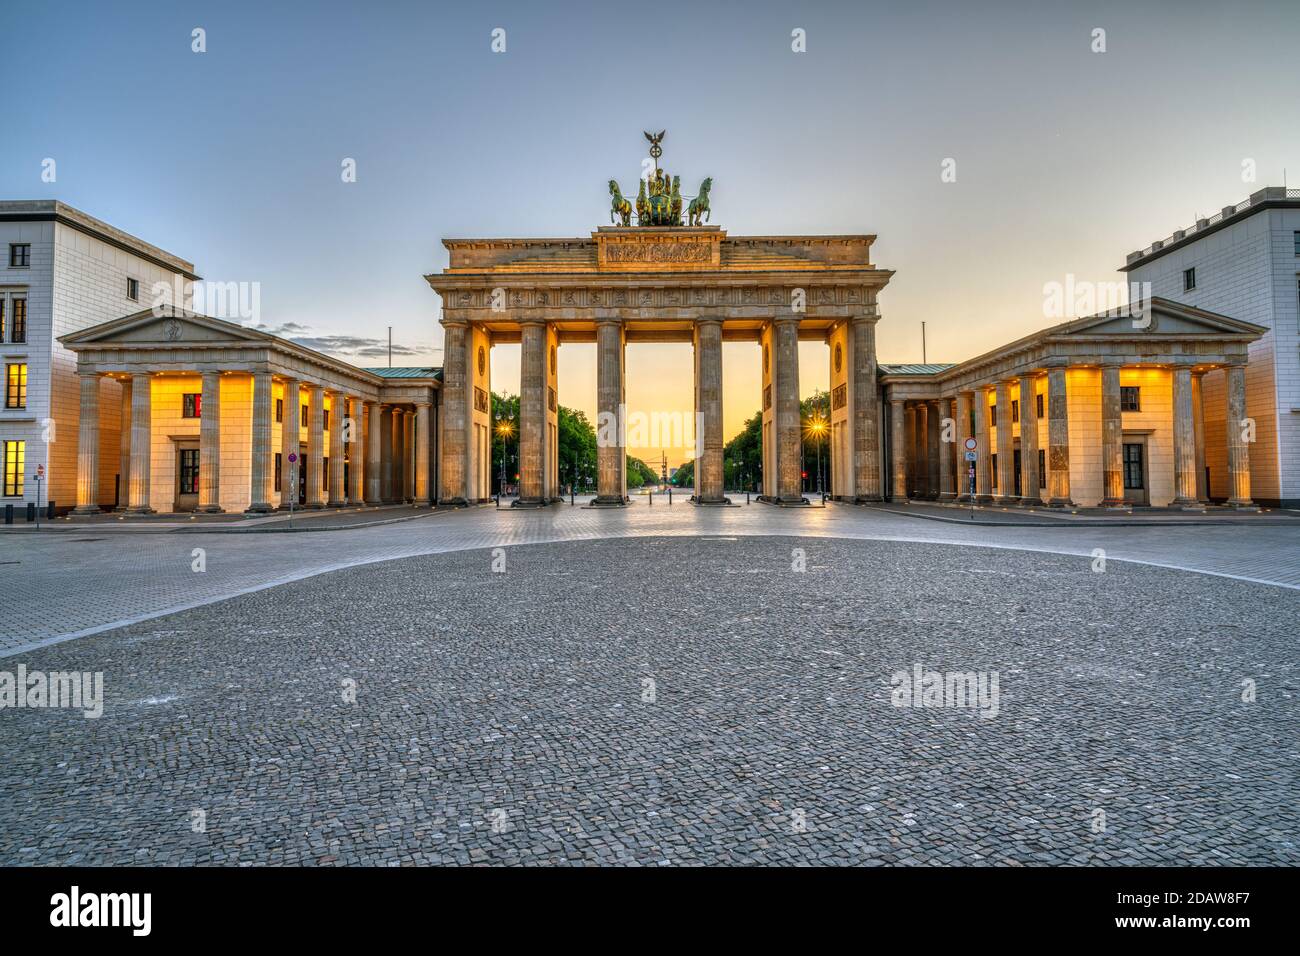 The iconic Brandenburg Gate in Berlin after sunset Stock Photo